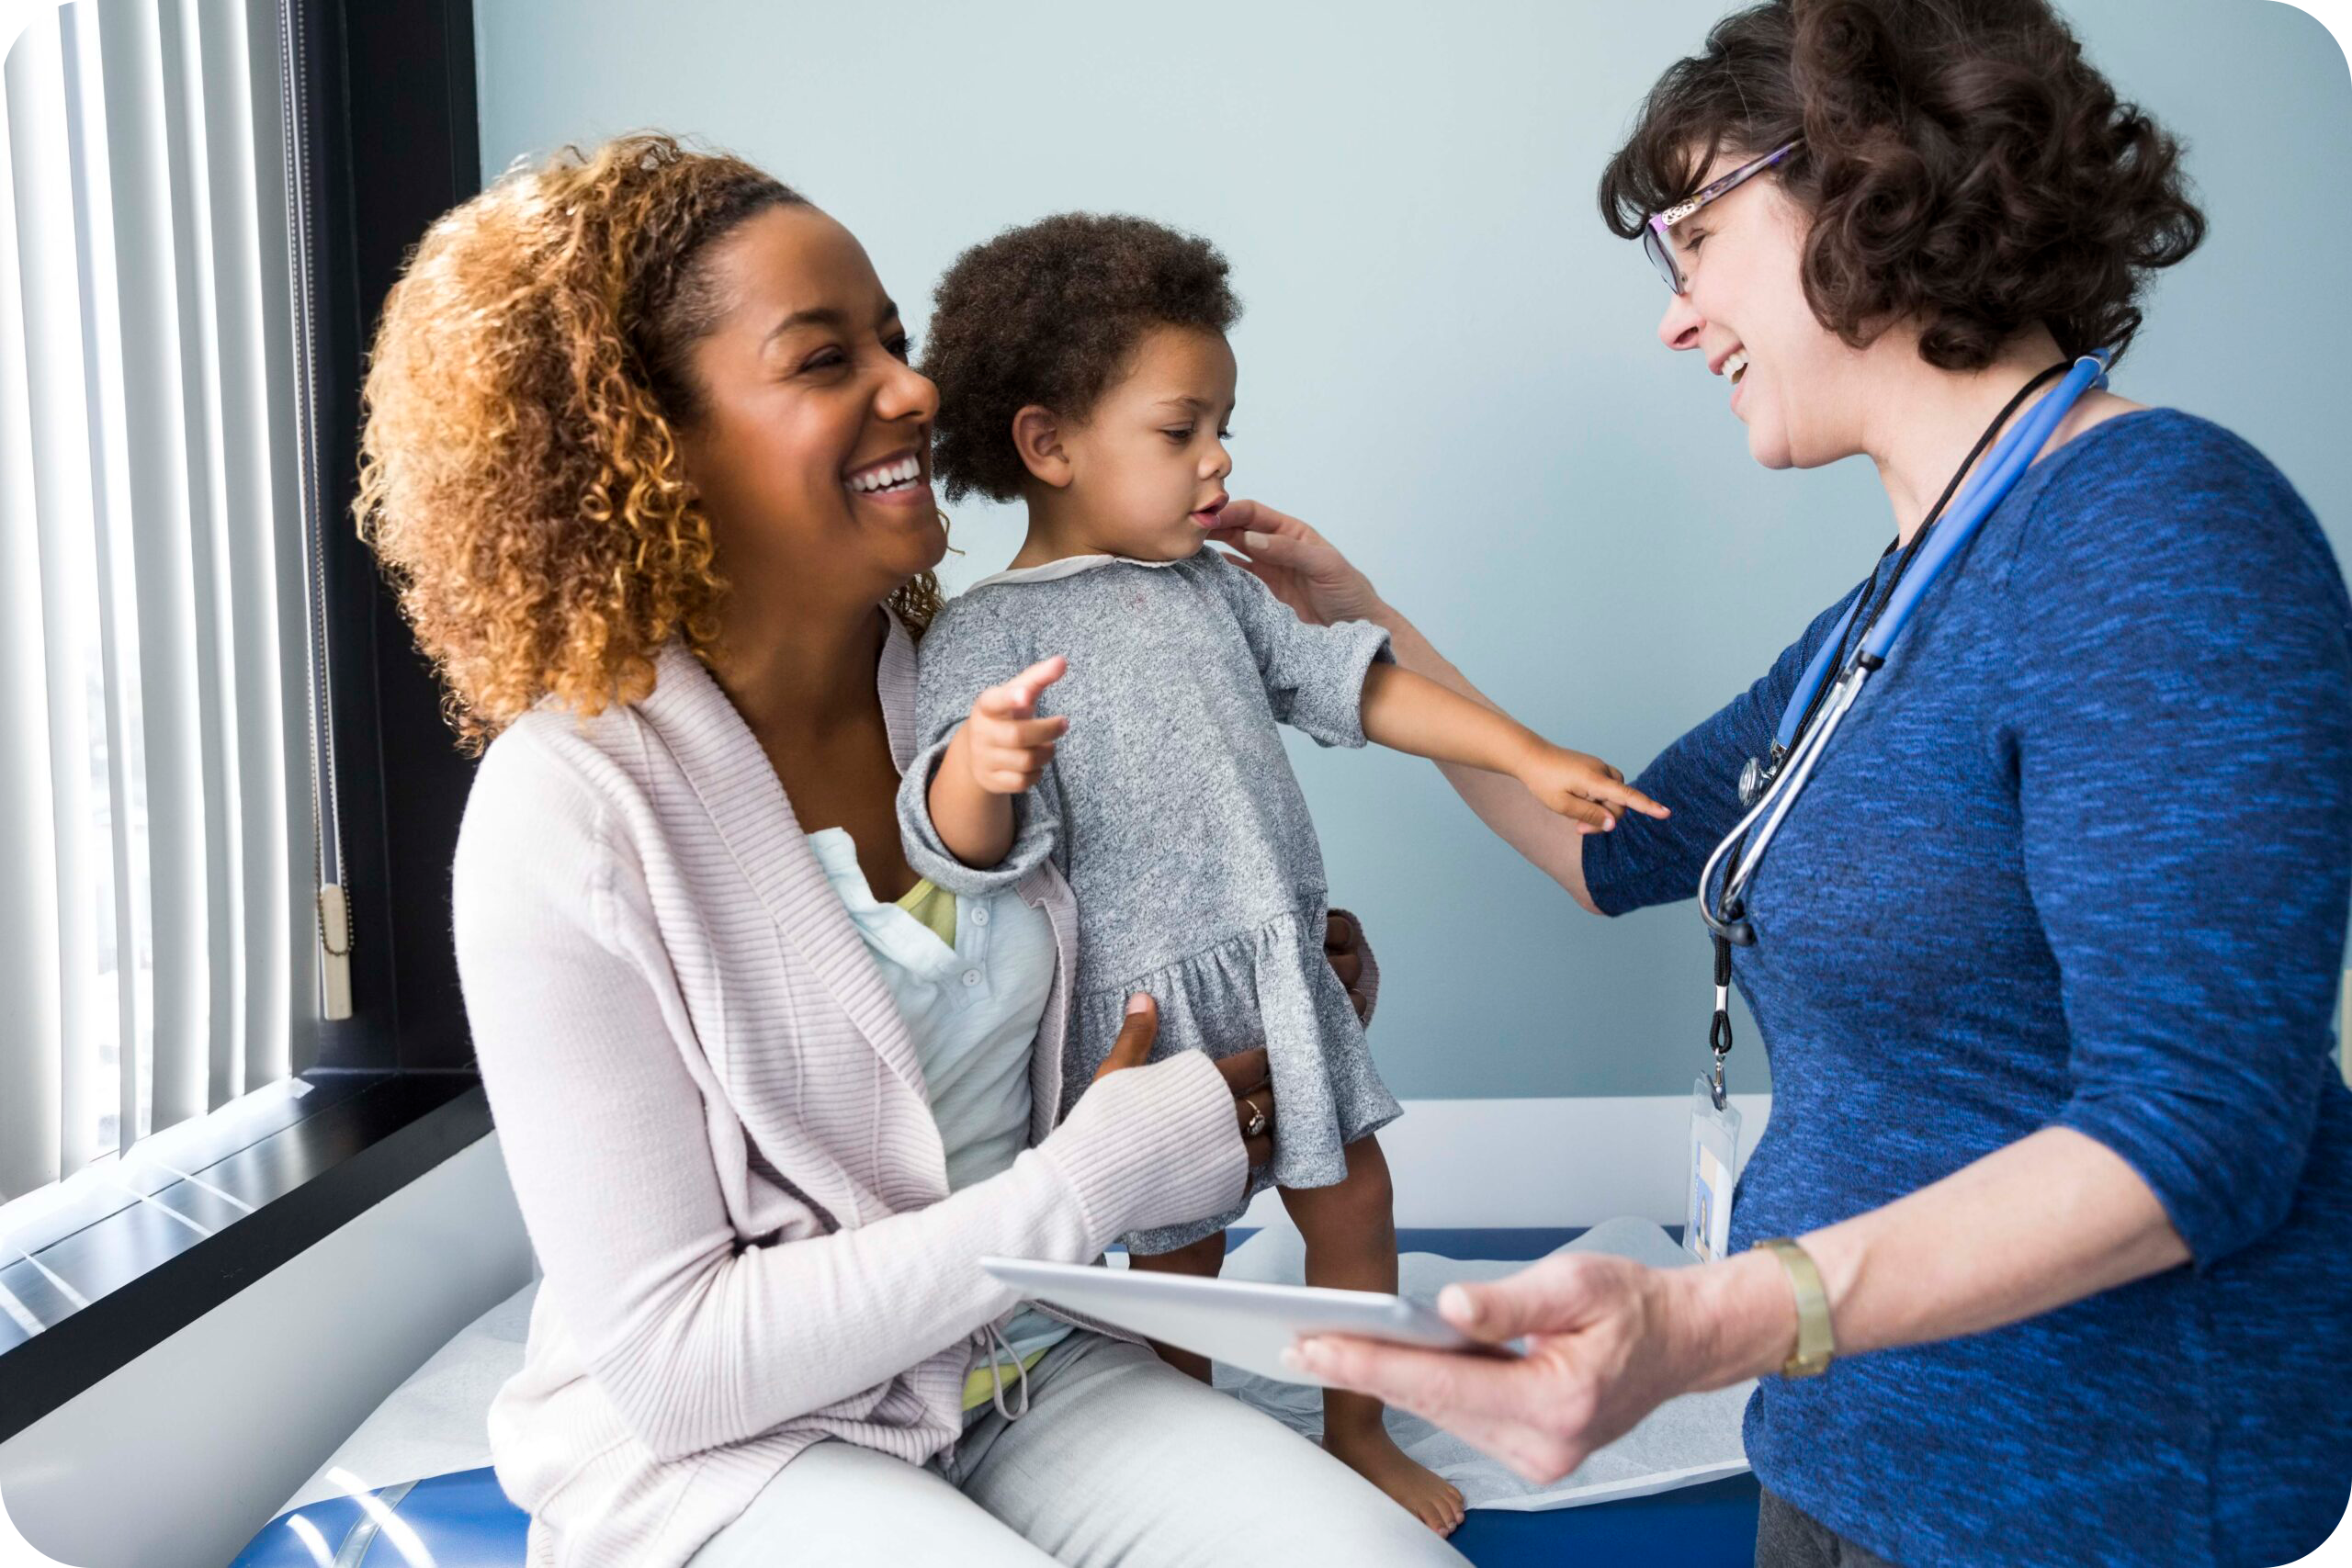 A strong primary care connection